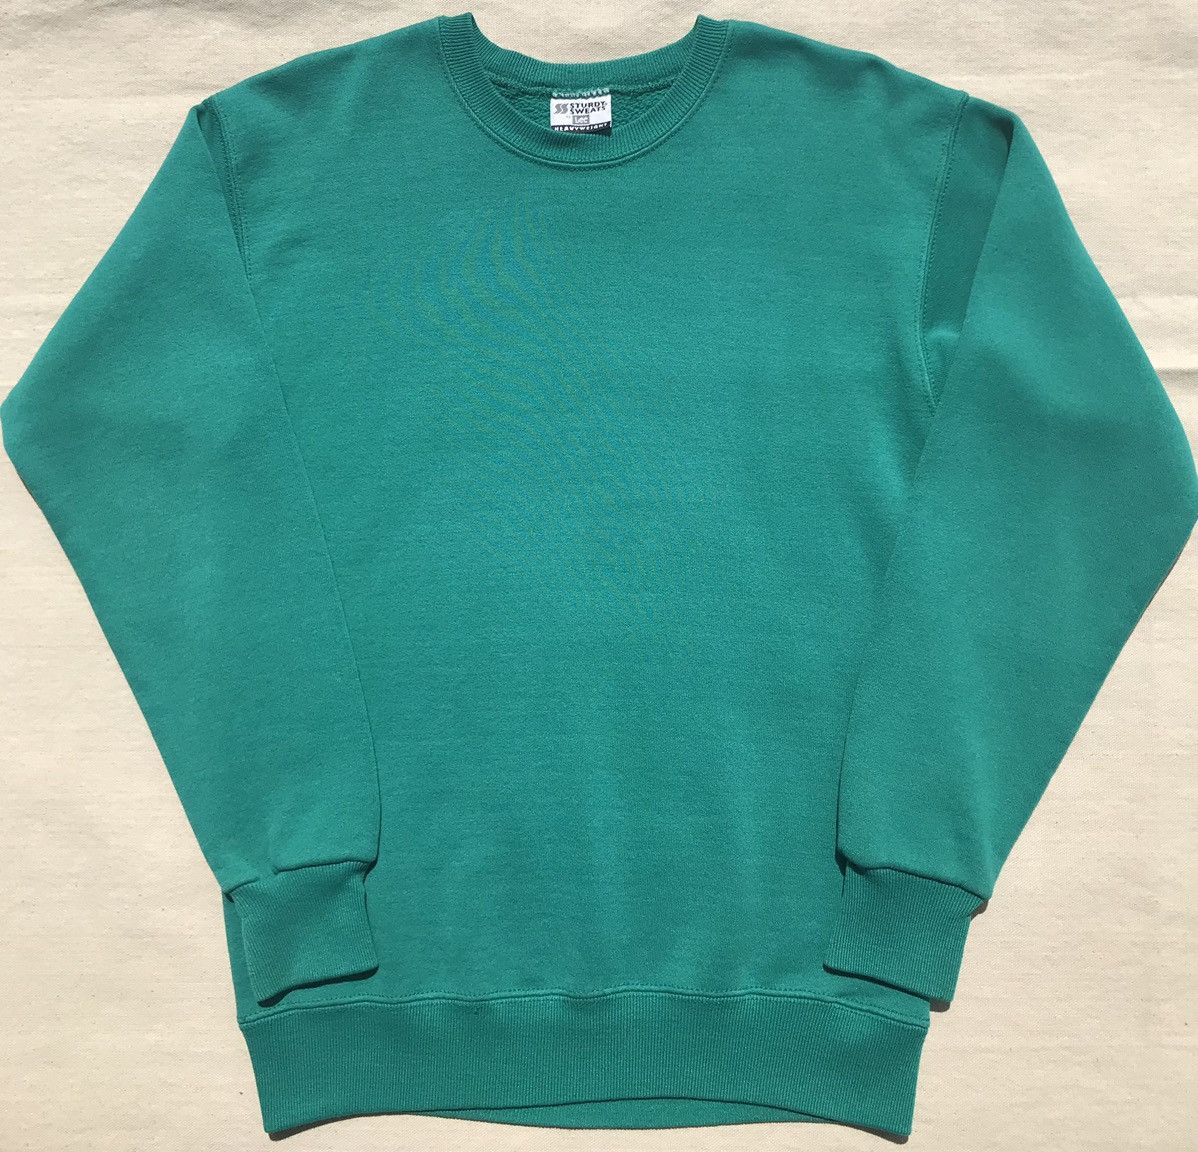 Lee VTG 90s Lee Heavyweight Turquoise Blank Sweatshirt Small Size US S / EU 44-46 / 1 - 1 Preview